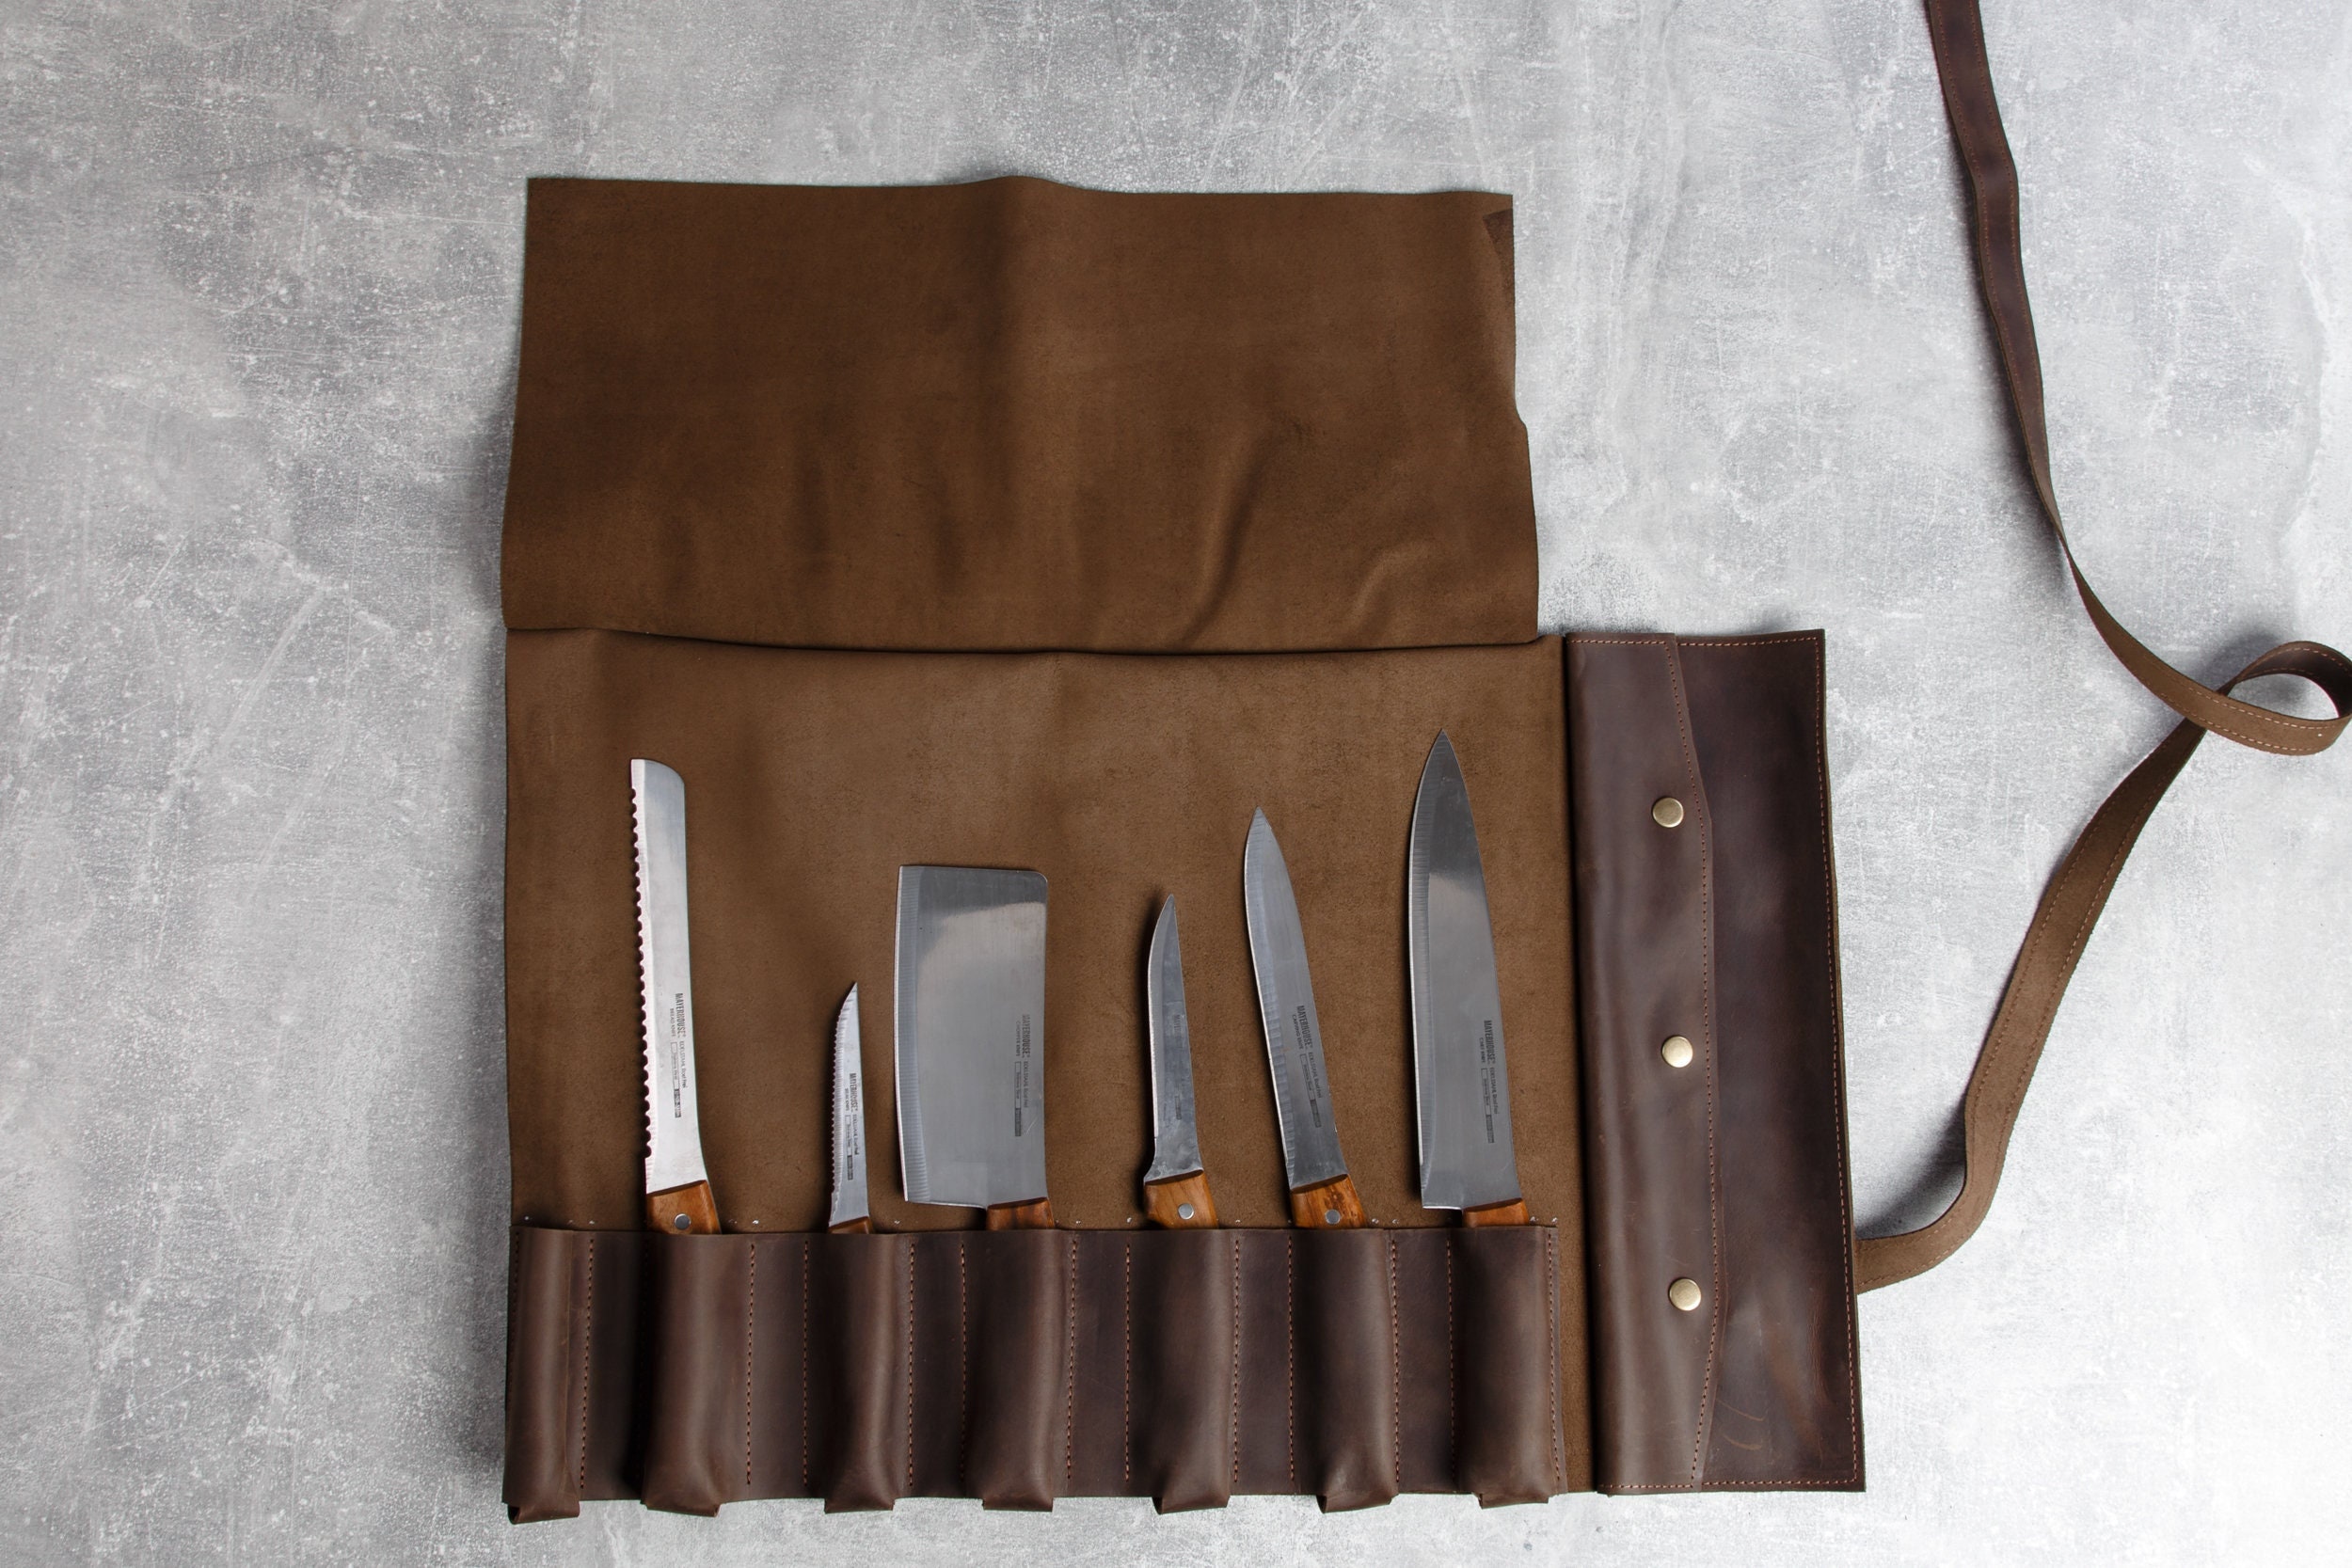 MTAPF Chef Knife Roll Bag - Durable Safe Knife Pouch with 6 Pockets, Adjustable Buckles and Strong Handle, Knife or Tool Rollup, Leather Knife Roll